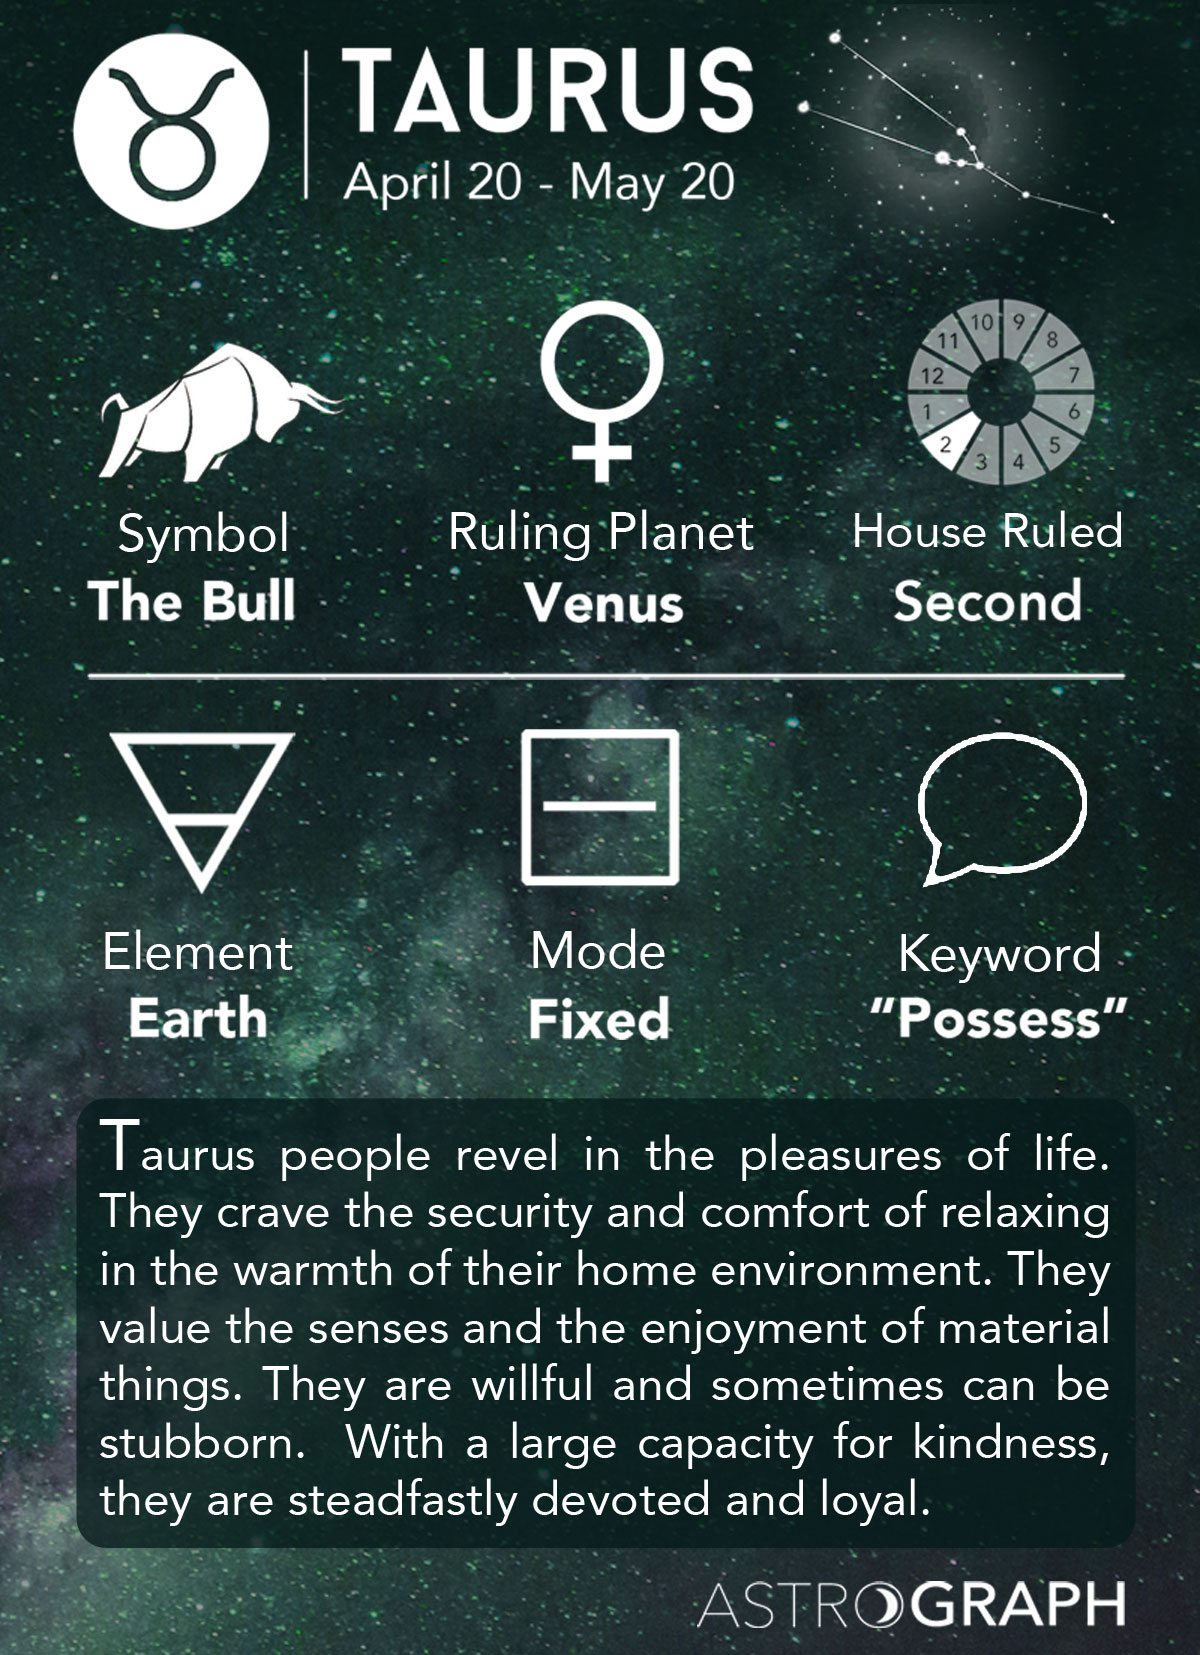 ASTROGRAPH - Taurus in Astrology